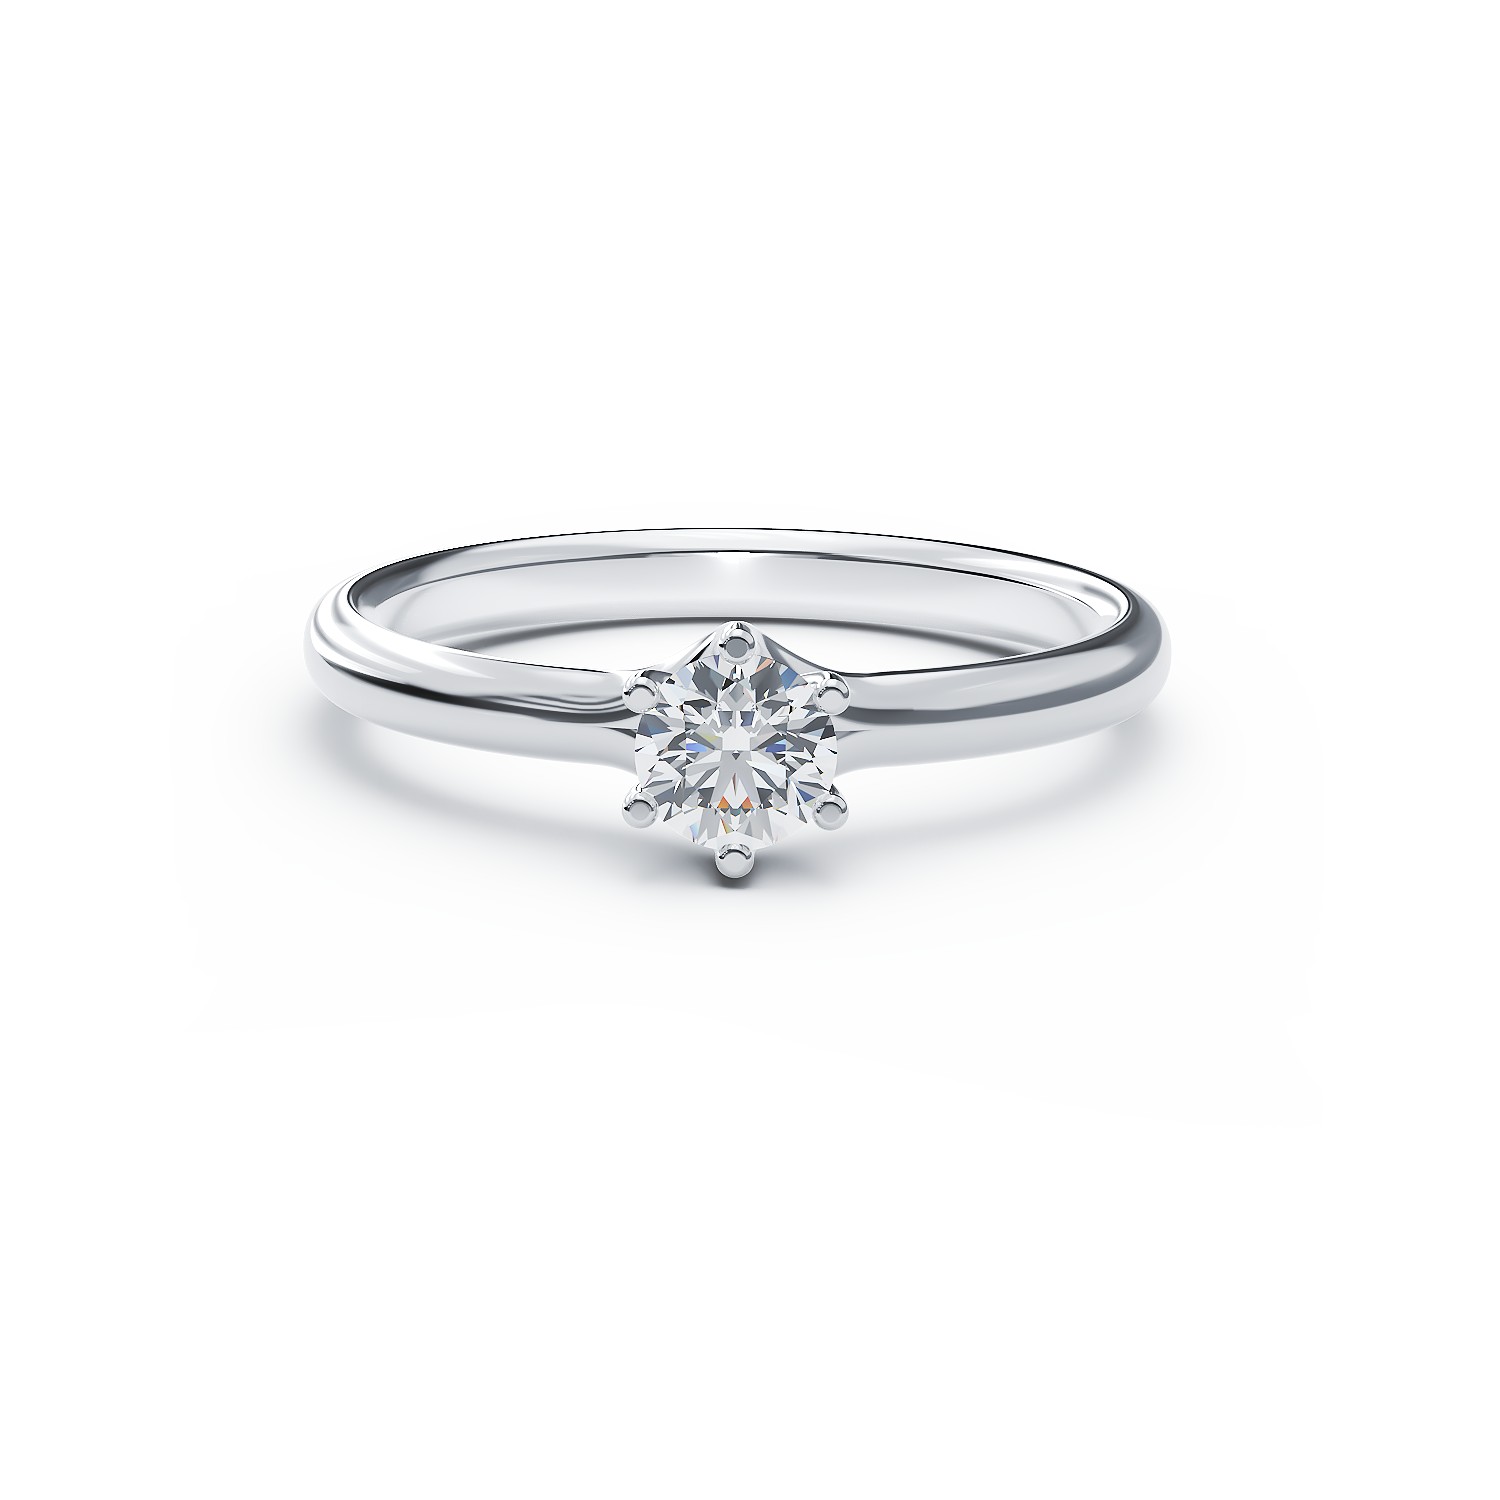 Platinum engagement ring with a 0.31ct solitaire diamond